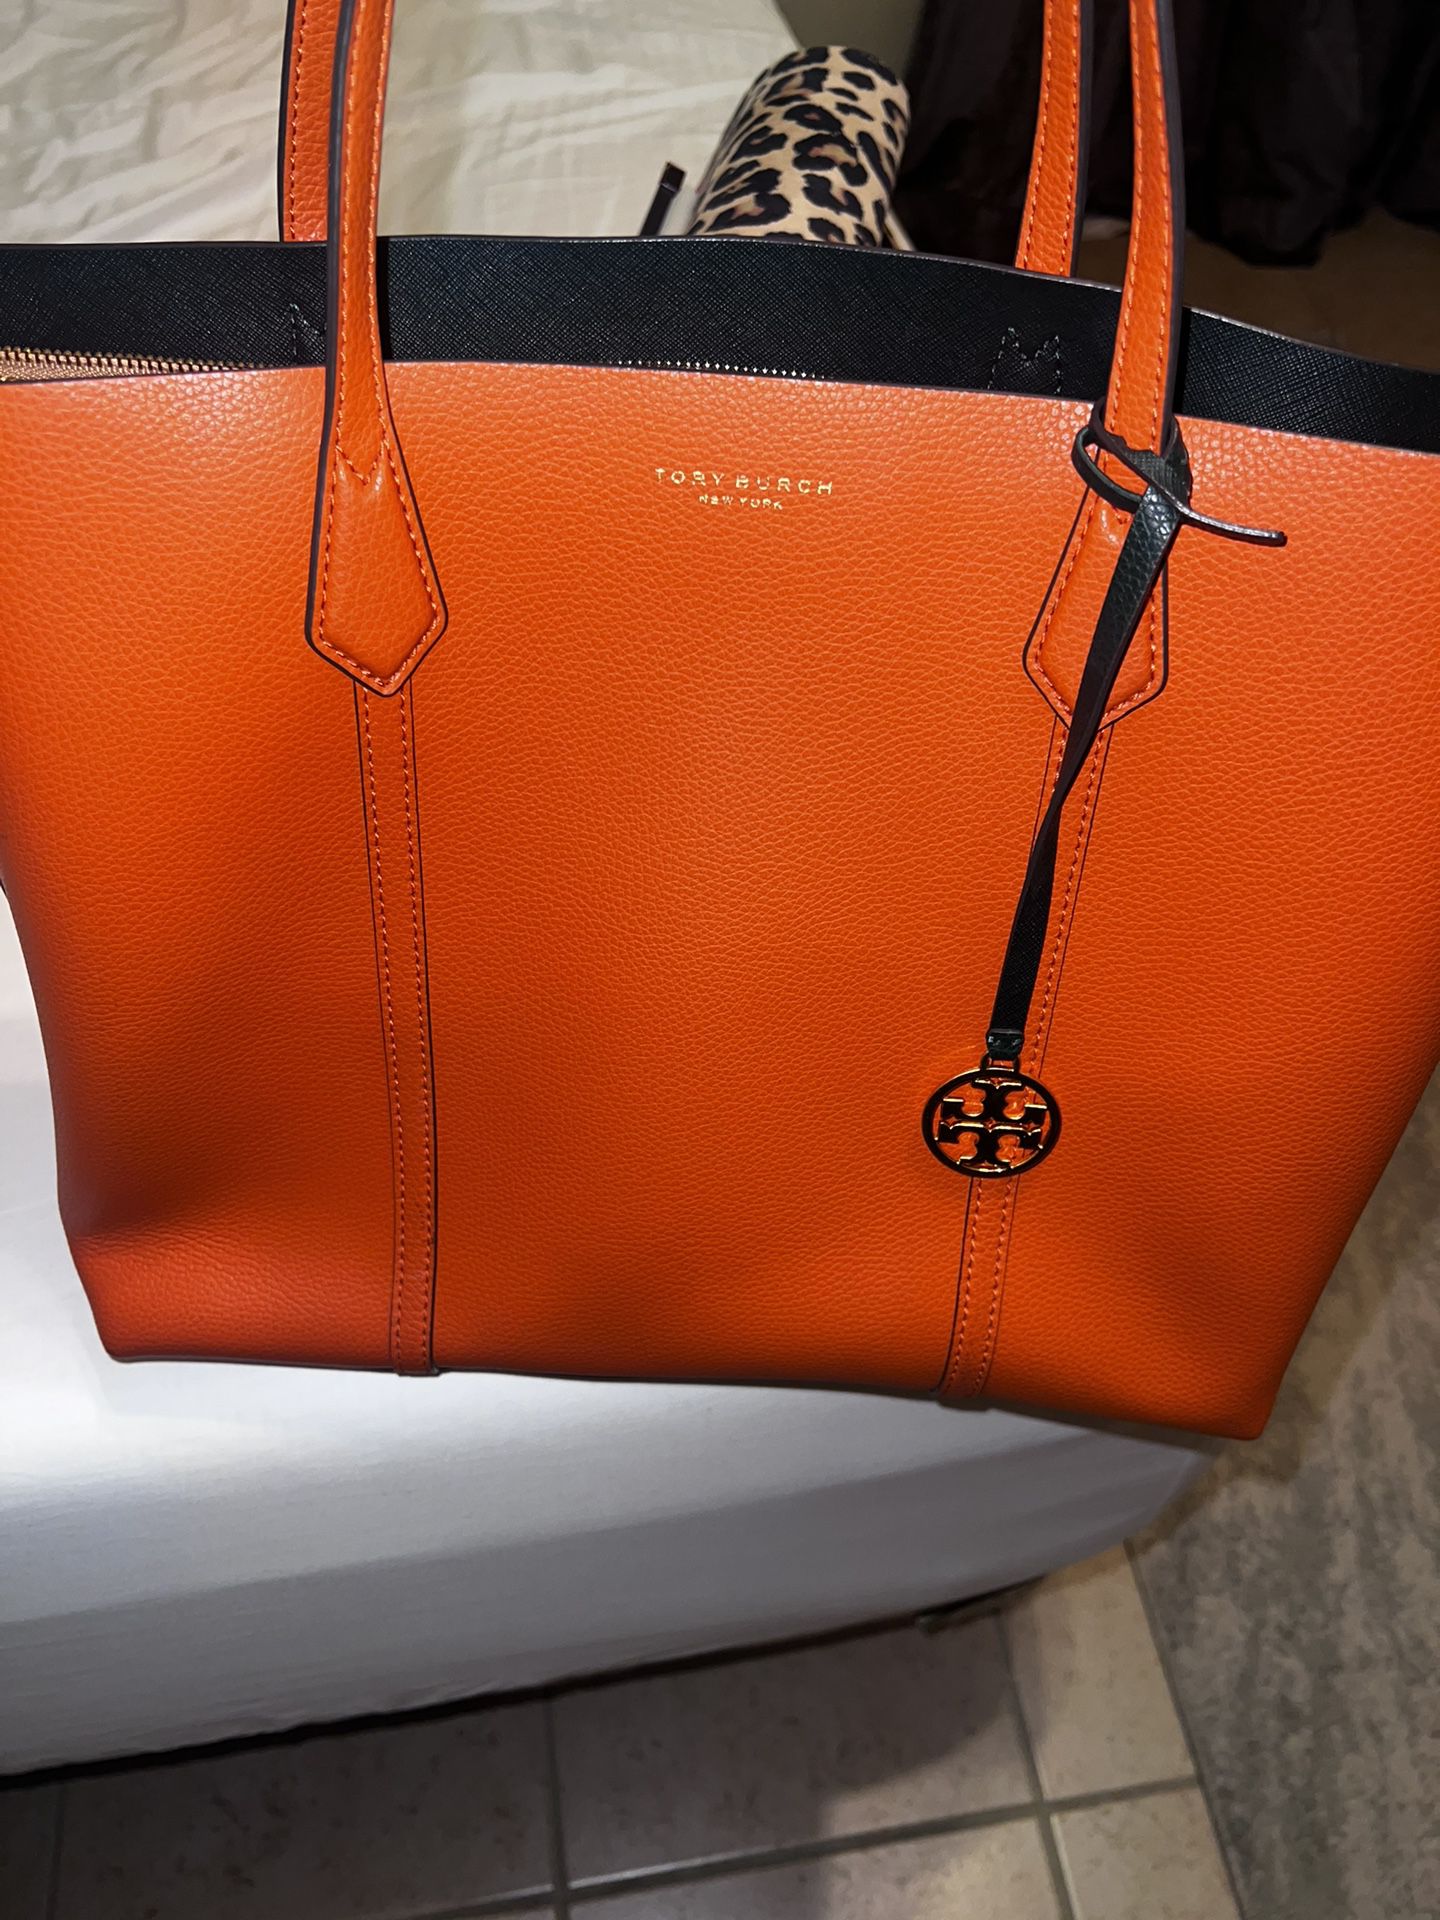 Gorgeous Tory Burch Tote